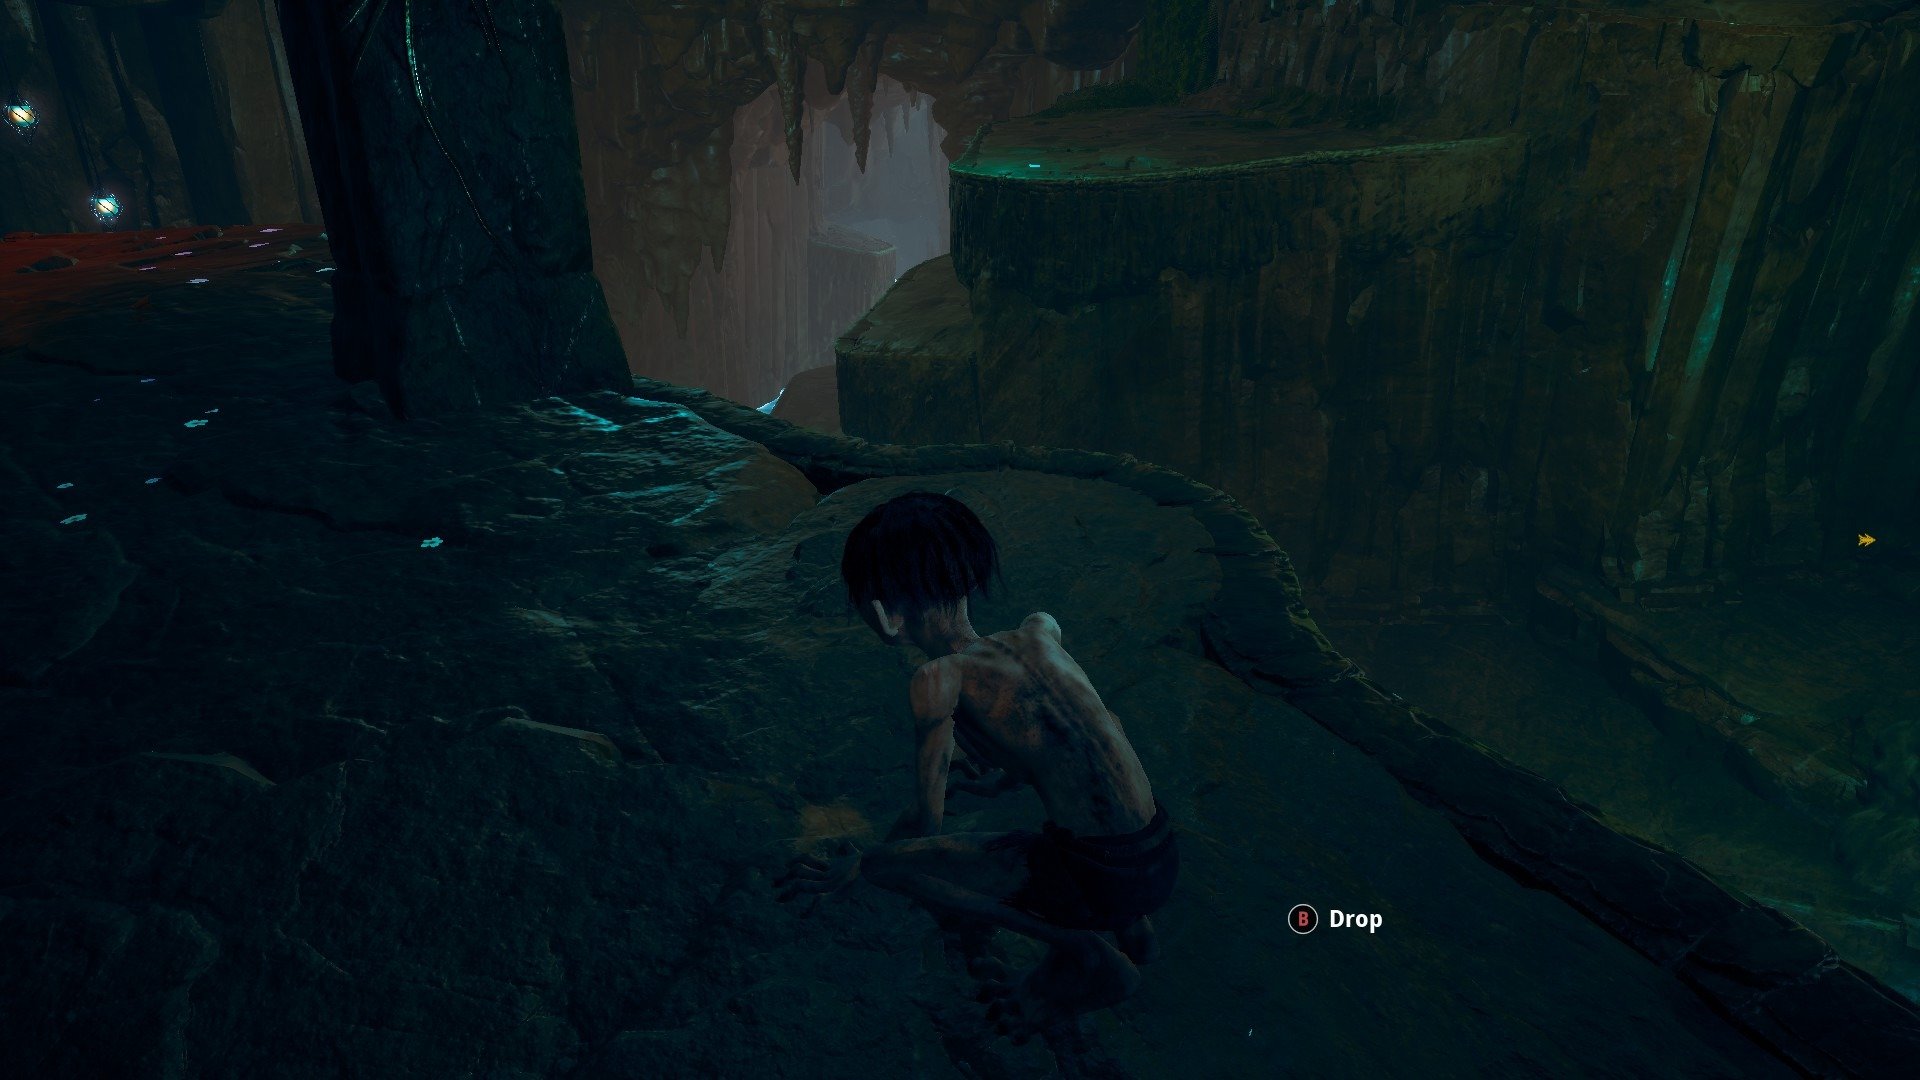 Gollum screenshot showing a wet cavern with a pool at the bottom. Gollum is crouched on a ledge overlooking the water and several platforms below. 